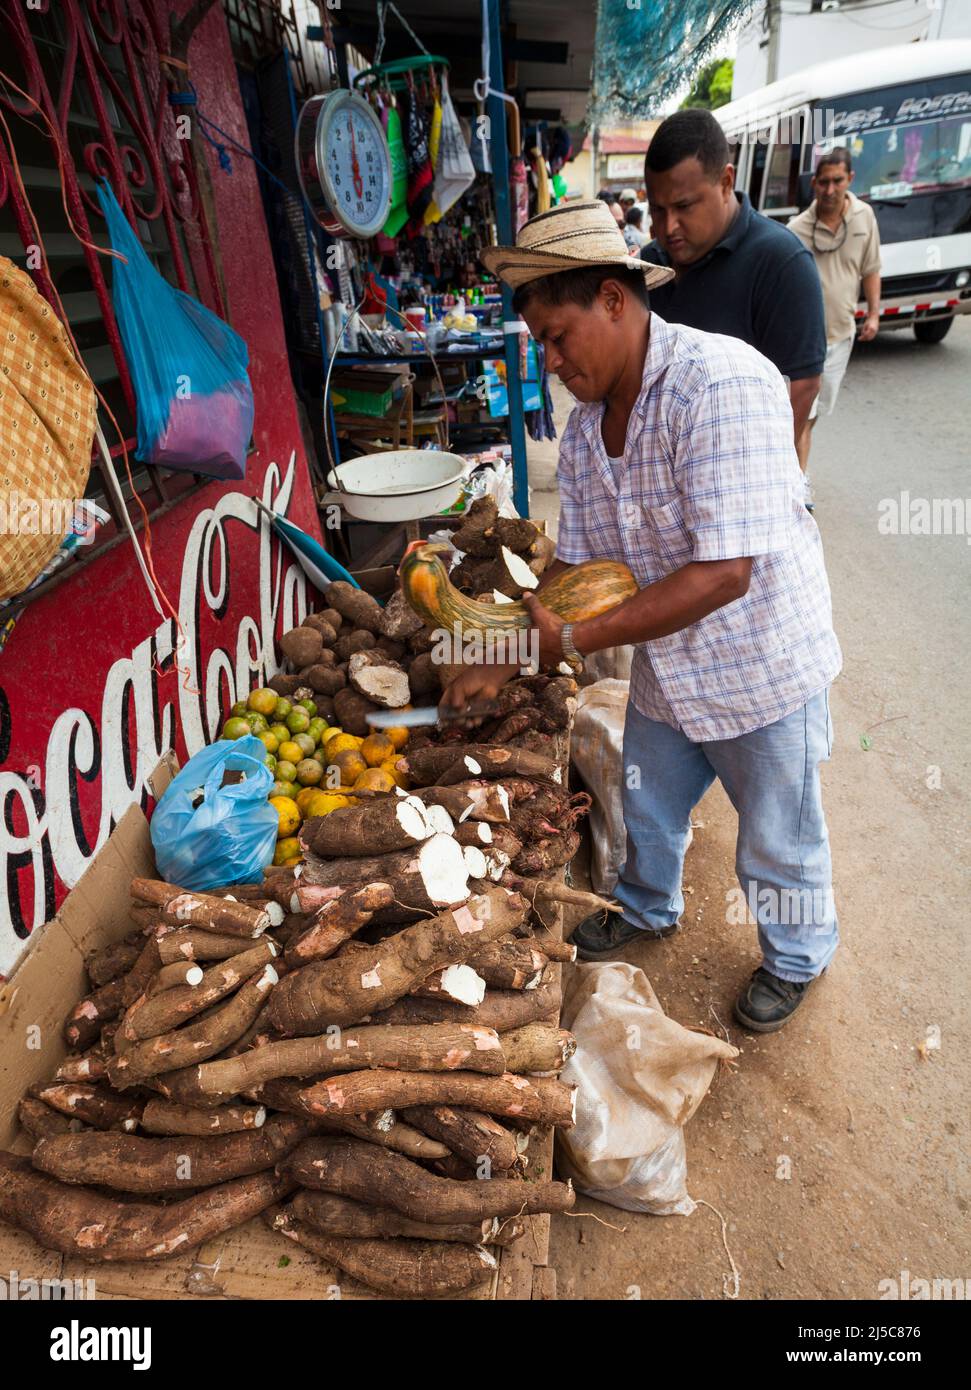 Early morning at the agricultural marketplace in the town Penonome, Cocle province, Republic of Panama, Central America. Stock Photo